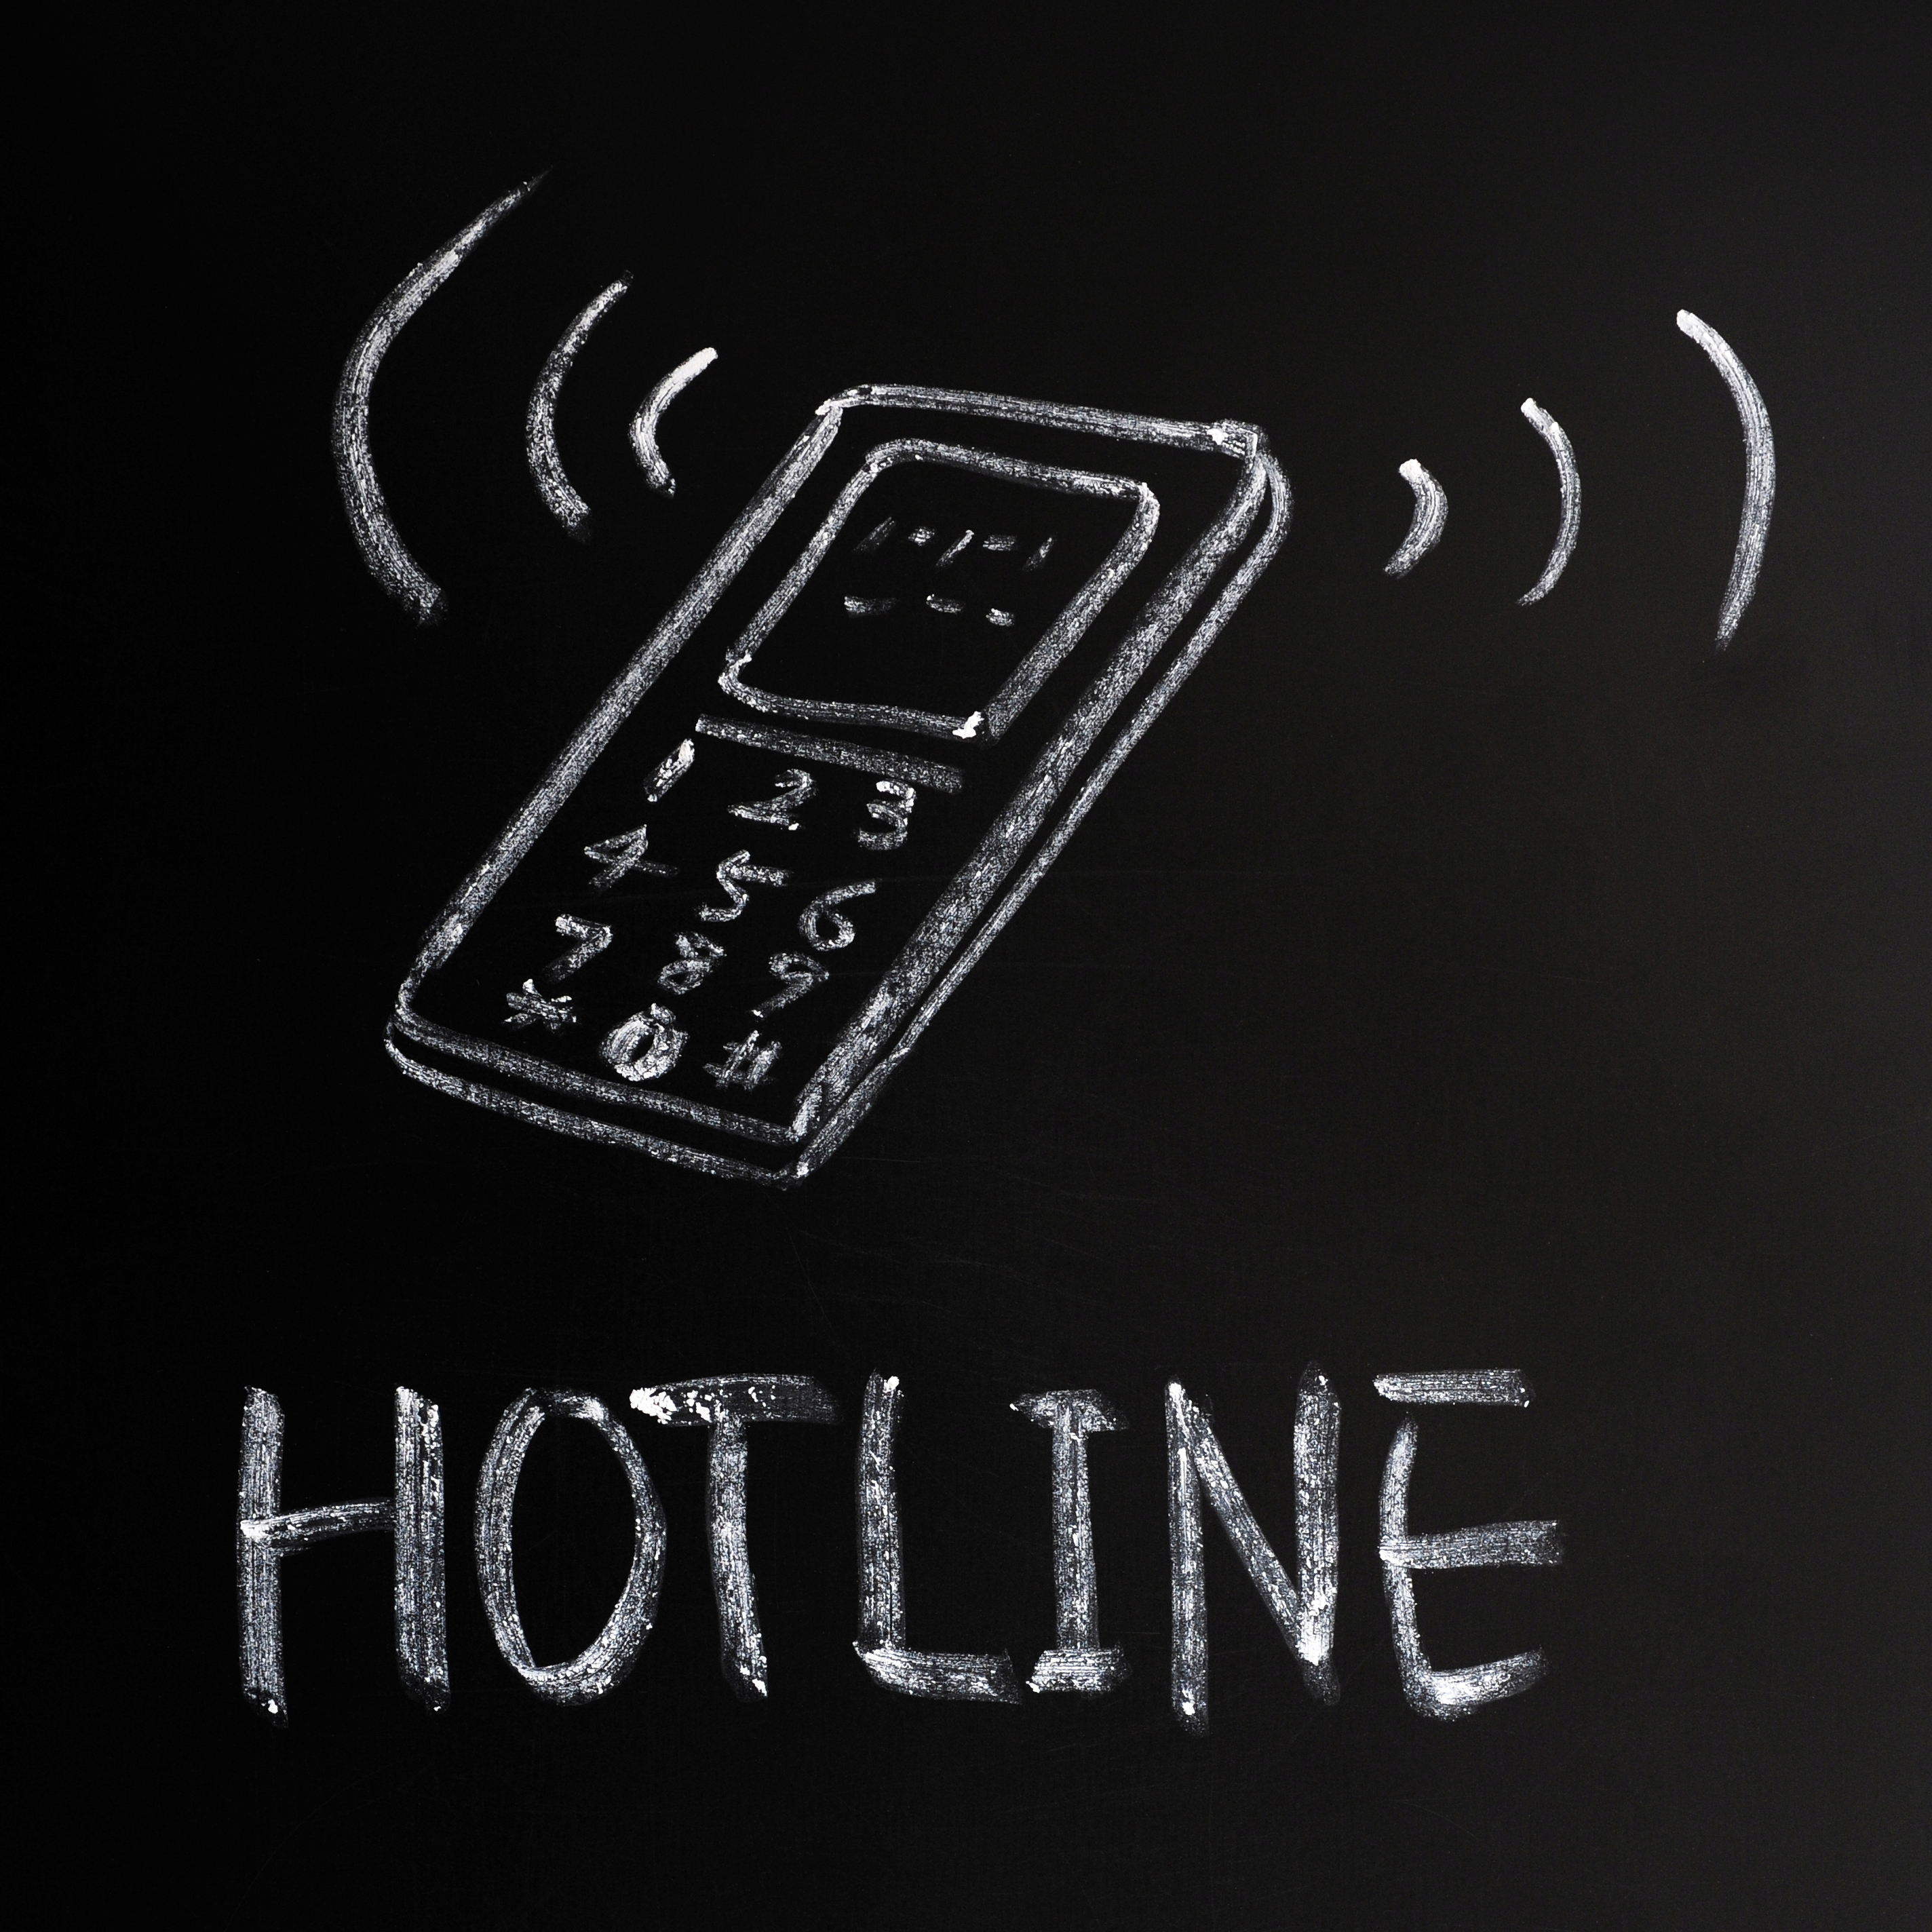 Drawing of phone hotline